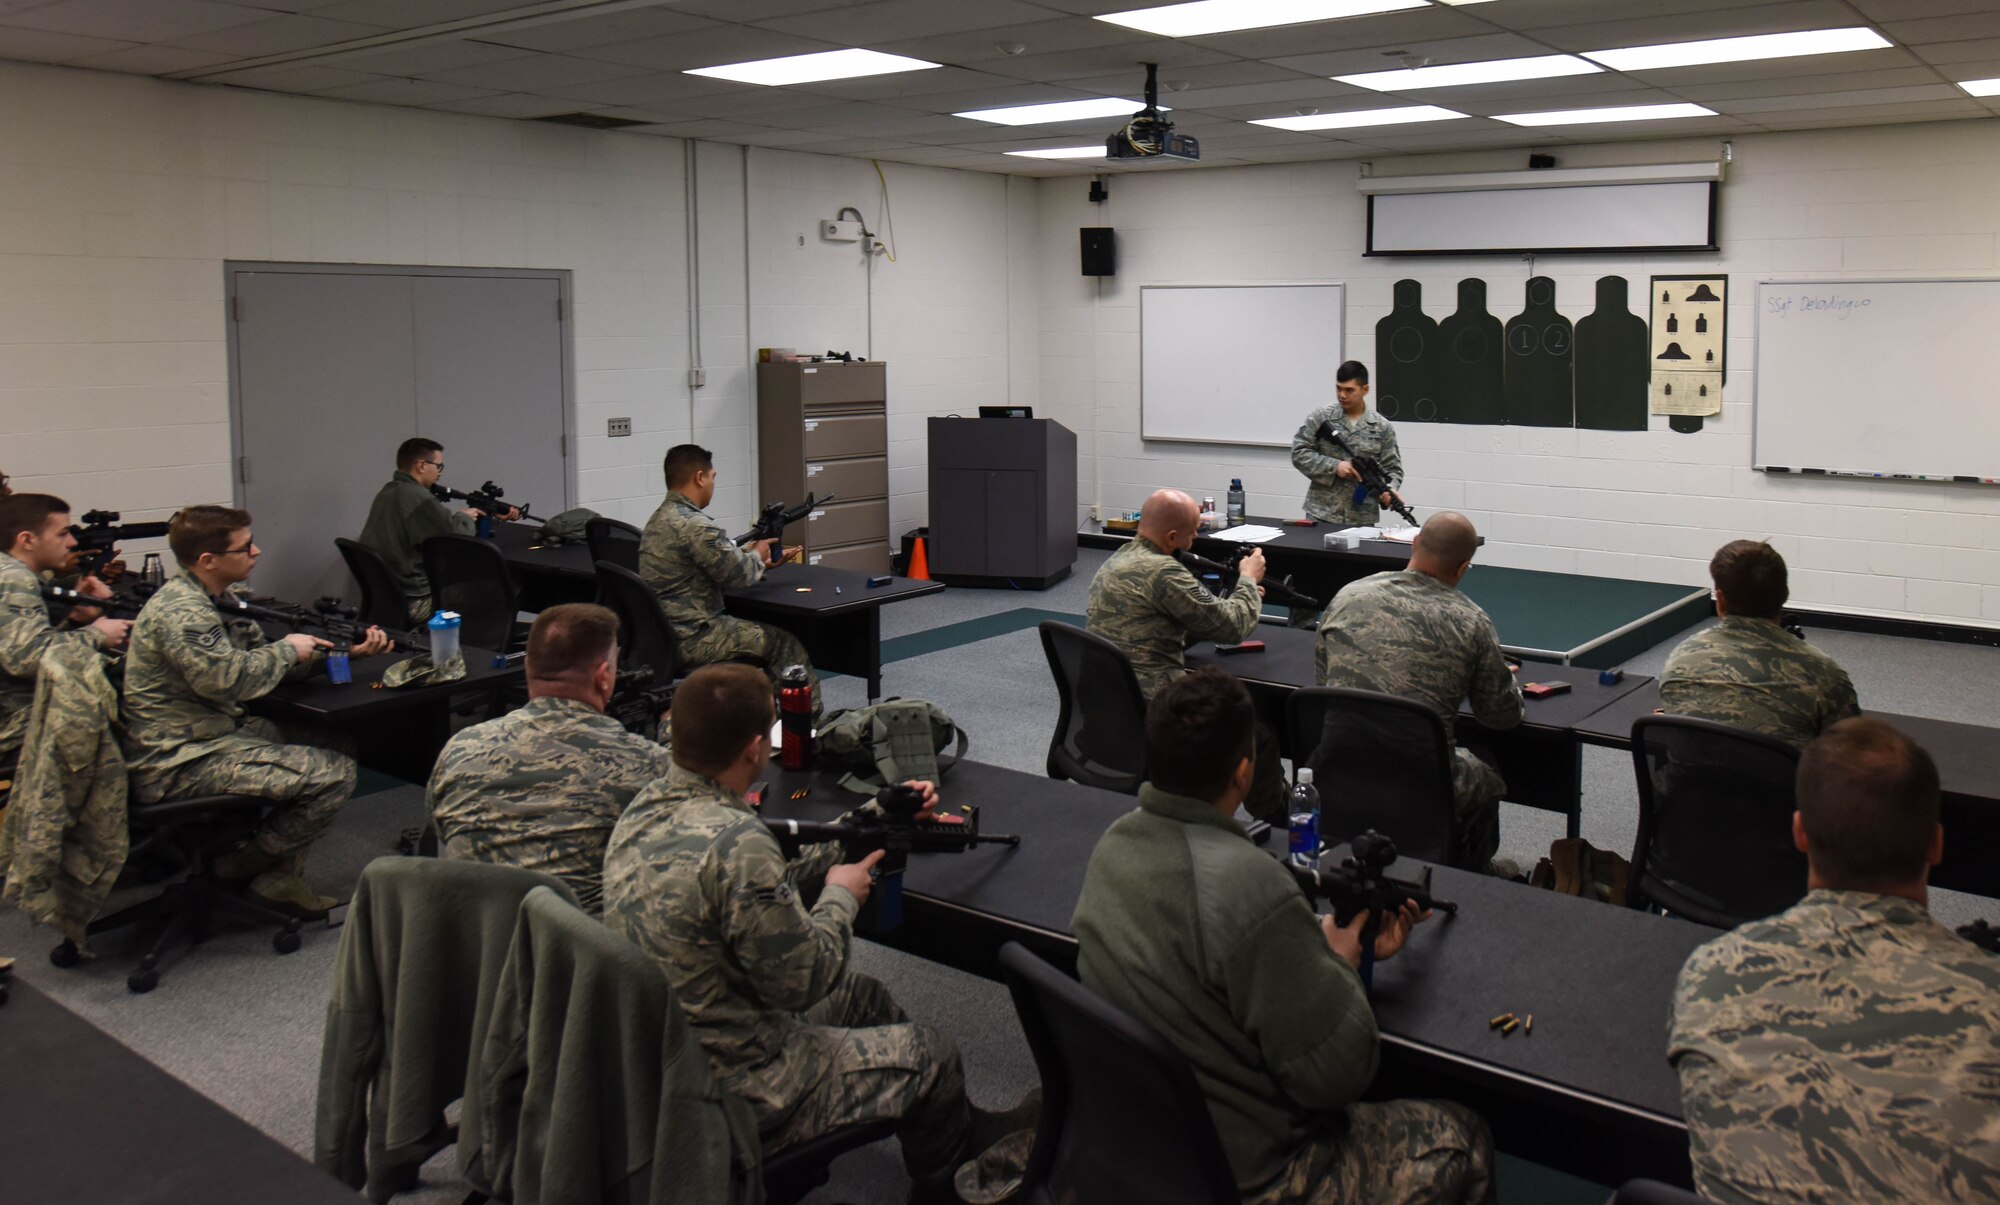 Staff Sgt. Dan Antonio Deldingco, 627th Security Forces Squadron Combat Arms Training and Maintenance instructor, teaches a class on how to properly handle and use an M-4 carbine at Joint Base Lewis-McChord, Wash., Jan. 31, 2018.